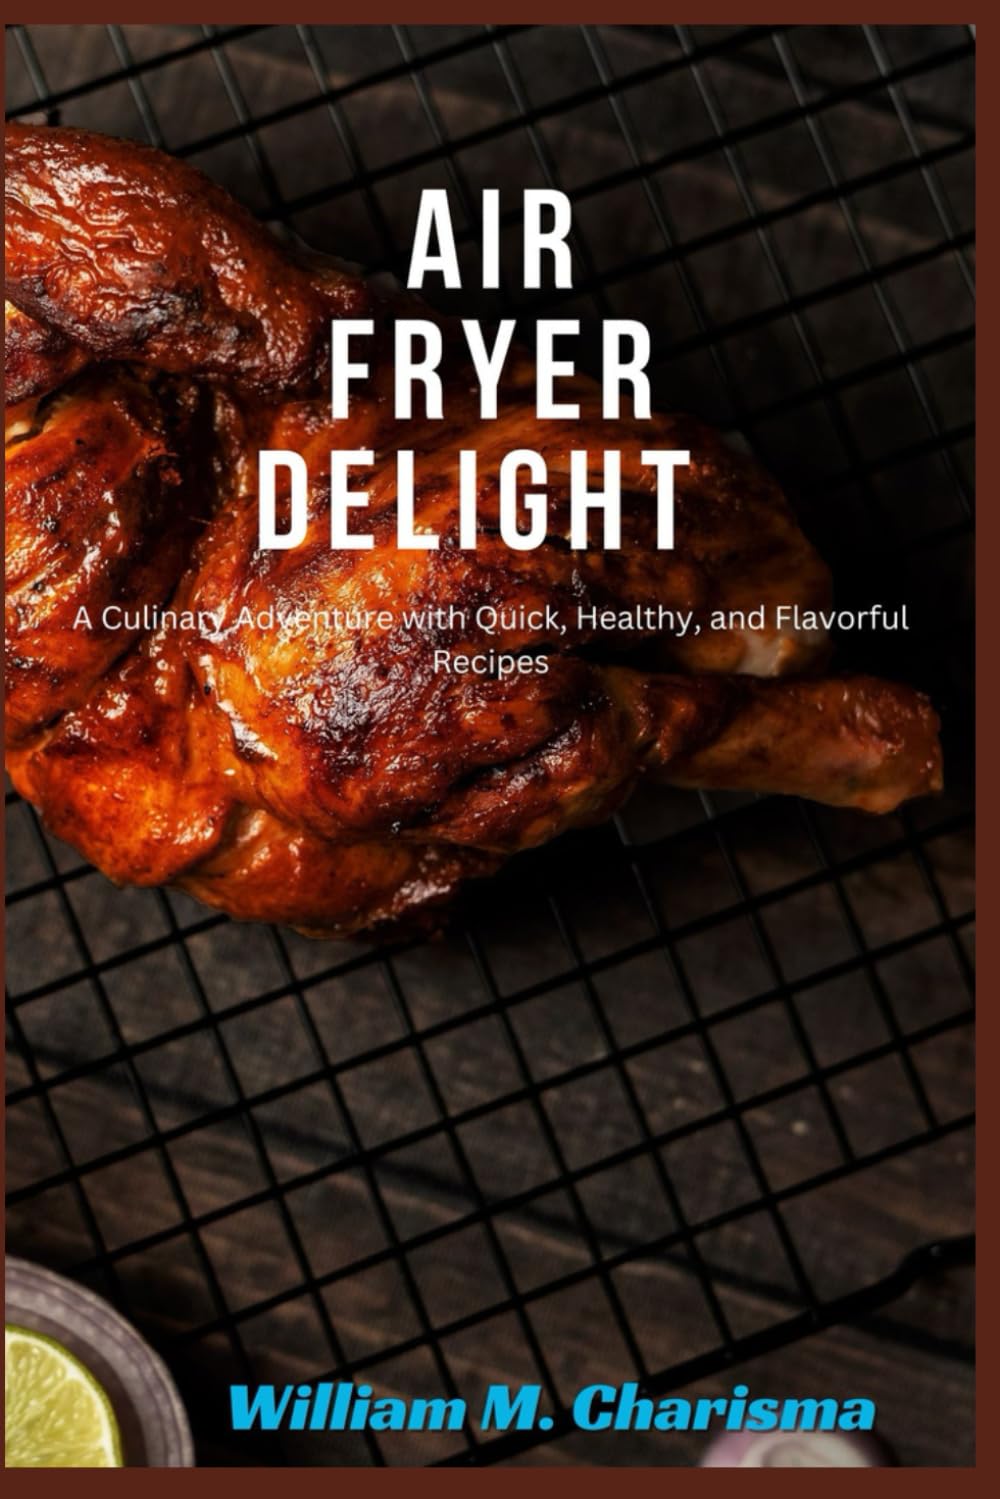 AIR FRYER DELIGHT: A Culinary Adventure with Quick, Healthy, and Flavorful Recipes